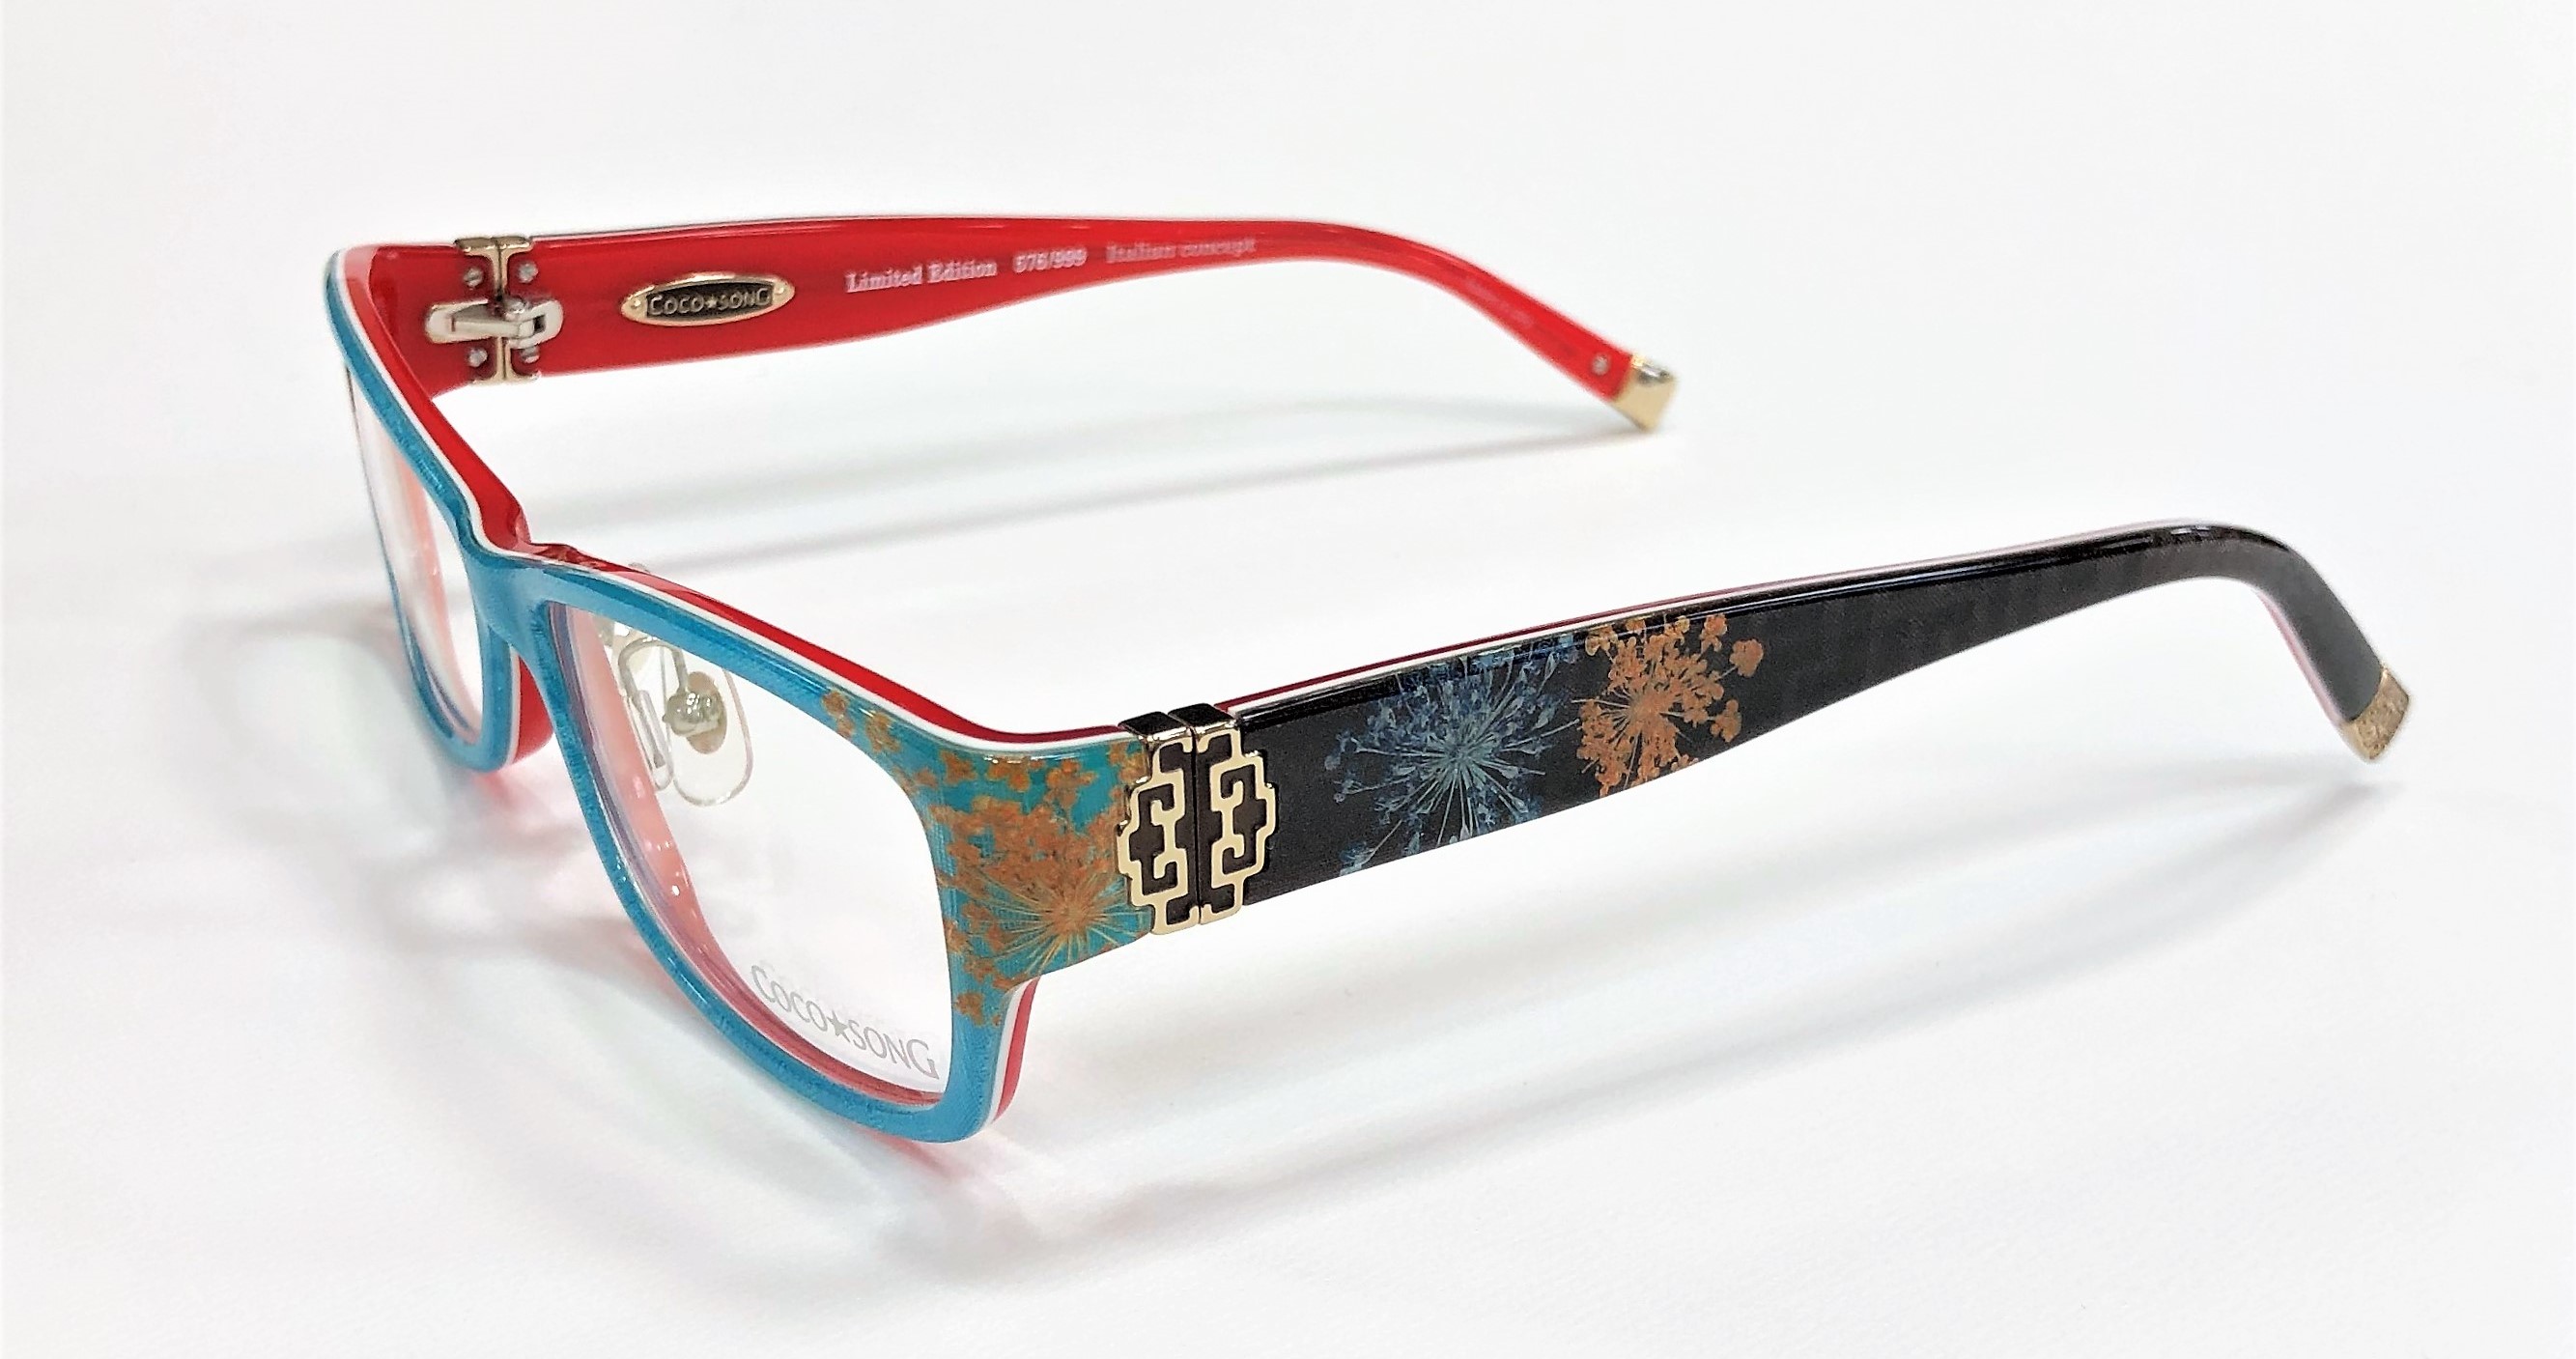 COCO☆SONG EYEWEAR Made in Italy ／ ココソング アイウェア 